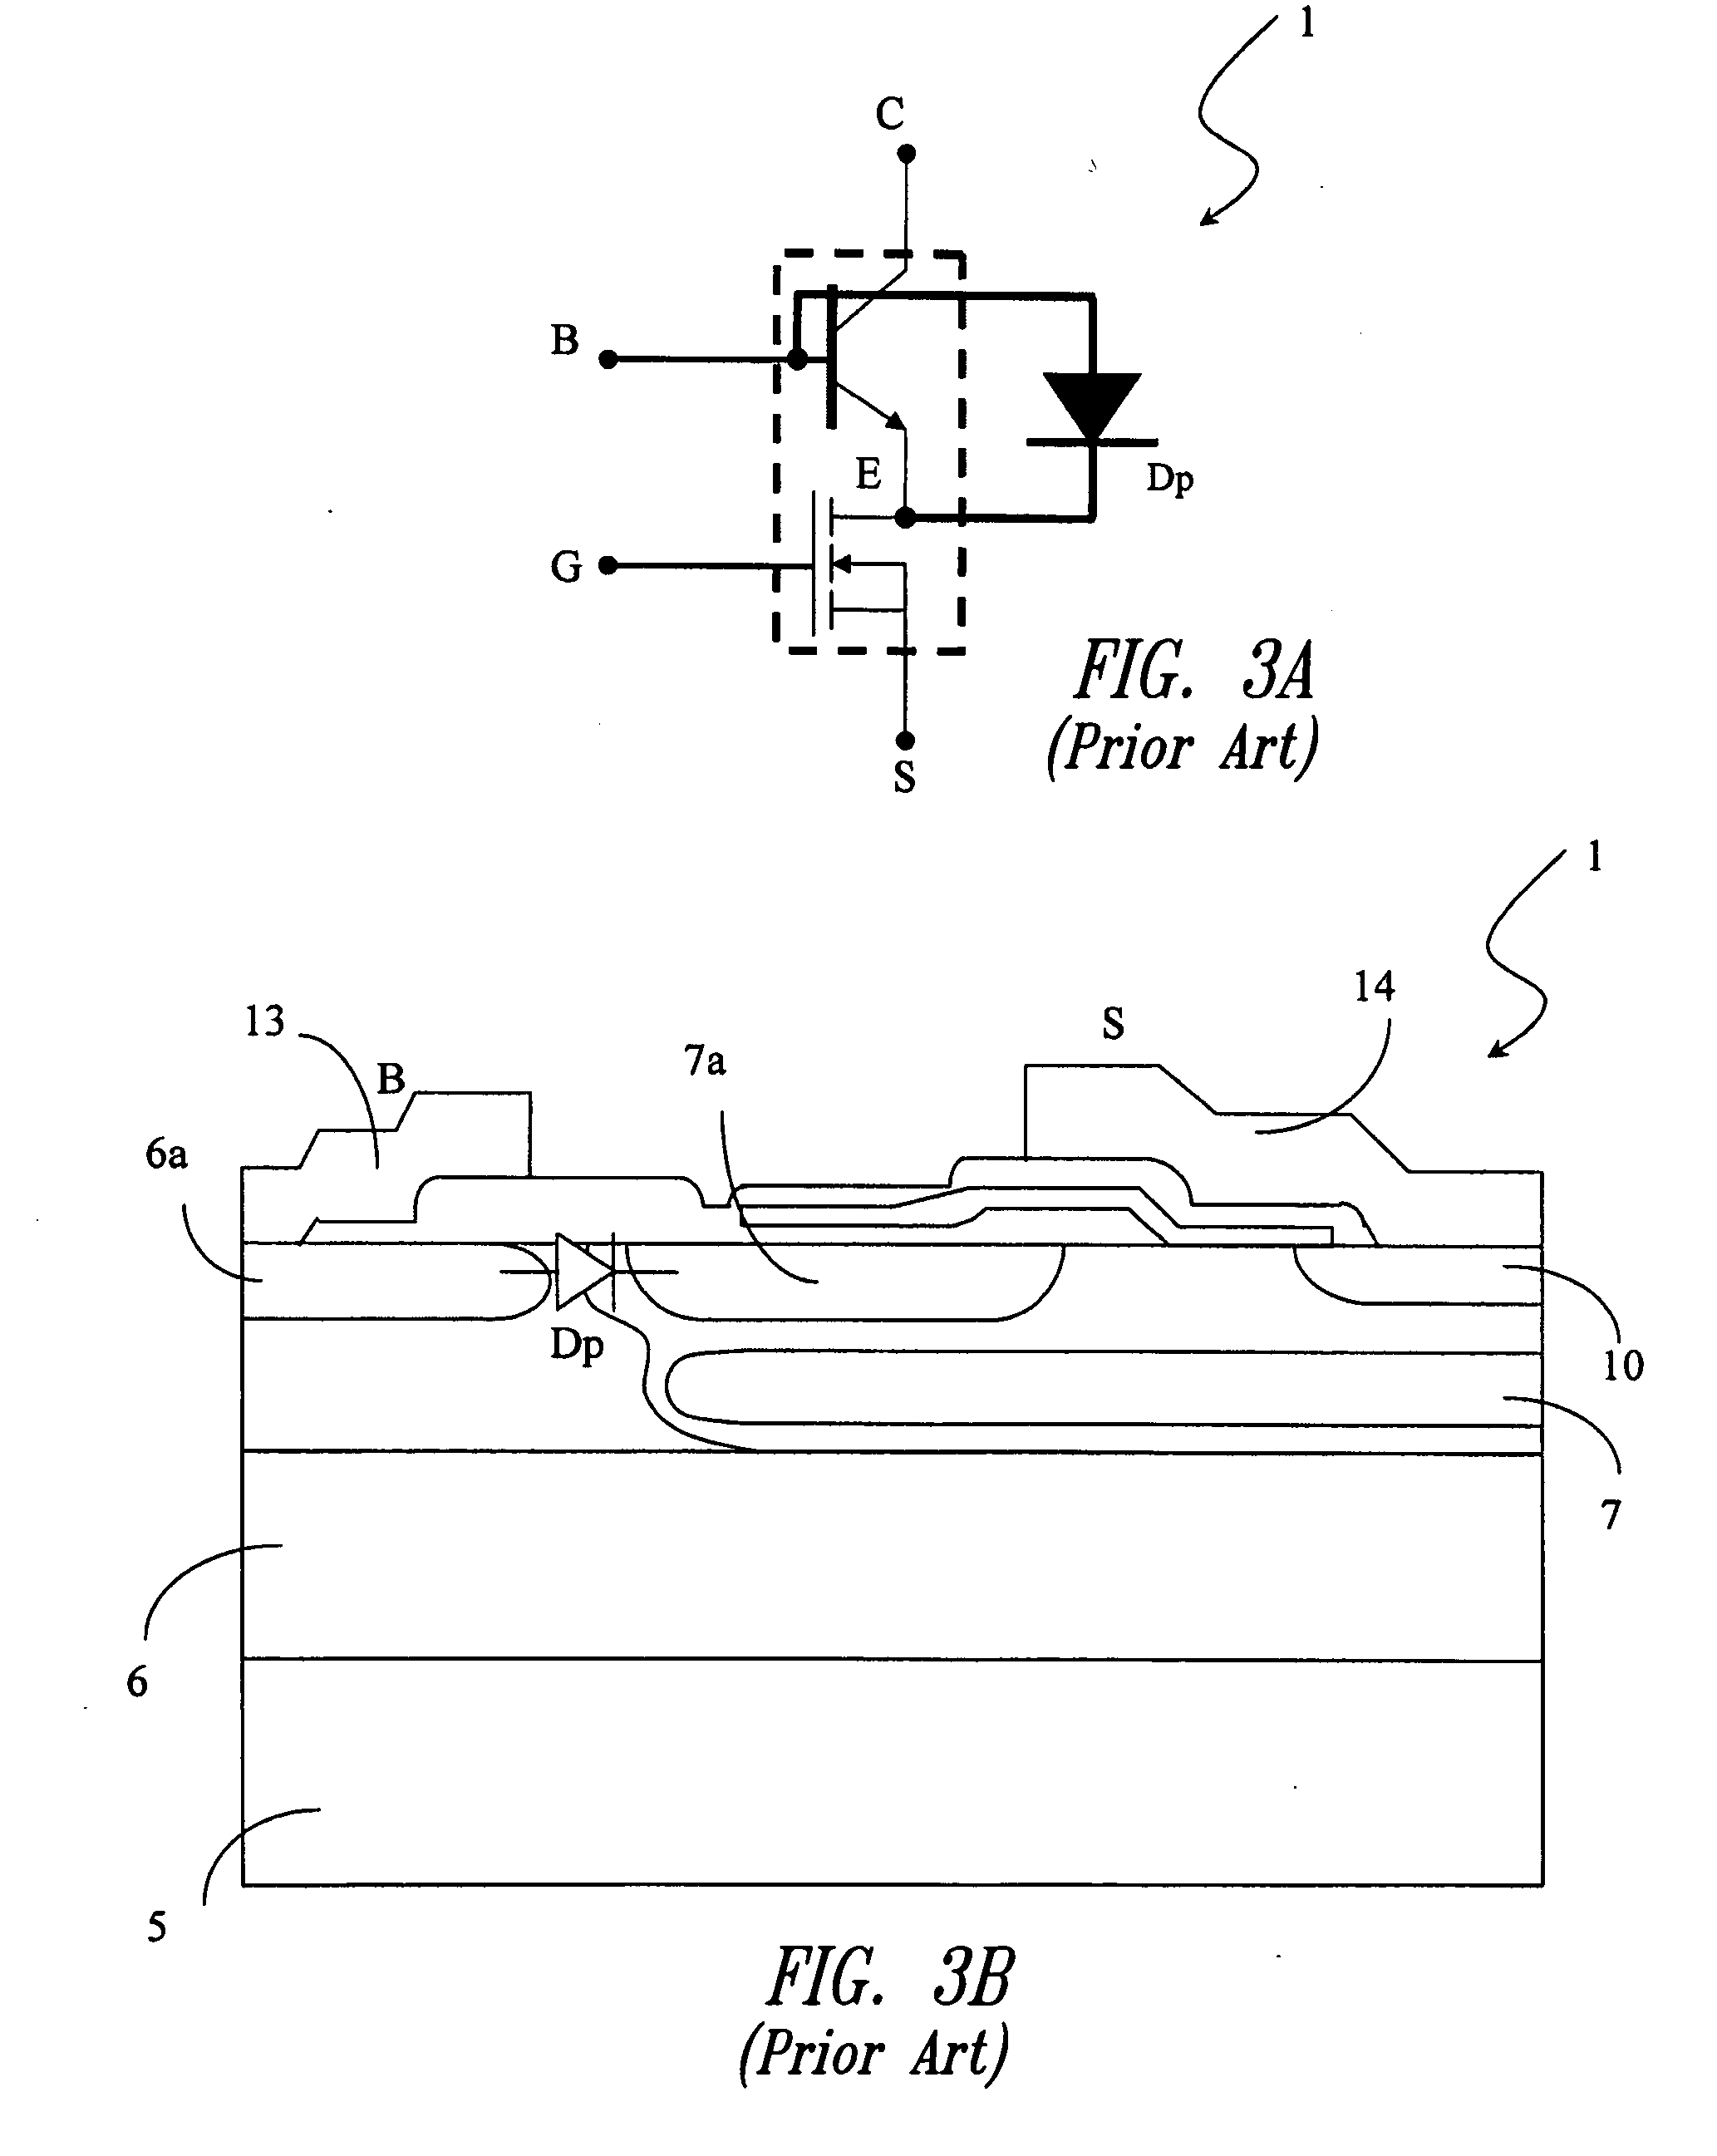 Method for realizing a contact of an integrated well in a semiconductor substrate, in particular for a base terminal of a bipolar transistor, with enhancement of the transistor performances